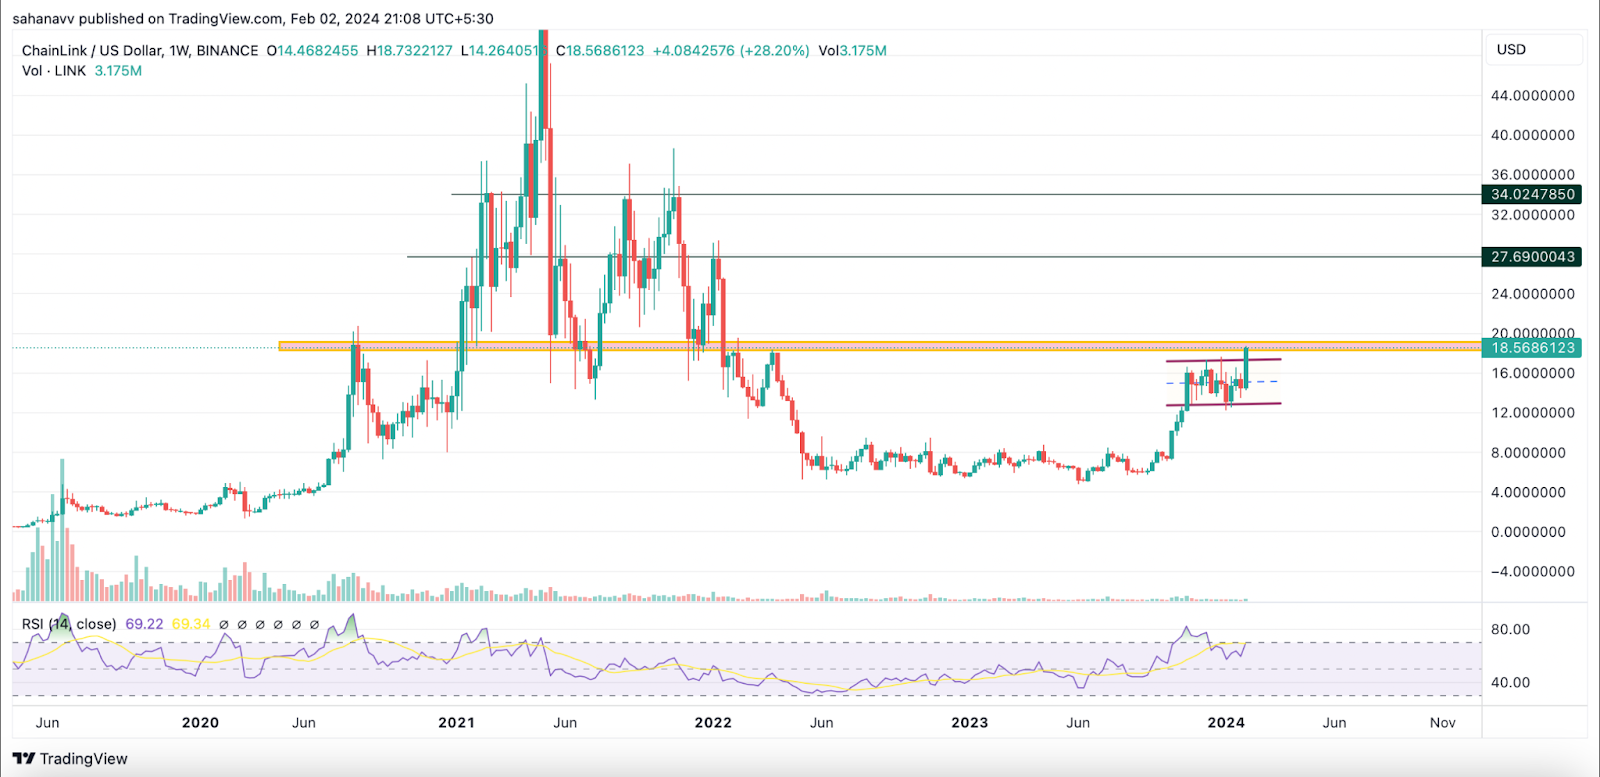 A Minor Bullish Push May Push the Chainlink Price Beyond : Are the LINK Marines Prepared for the Rally?